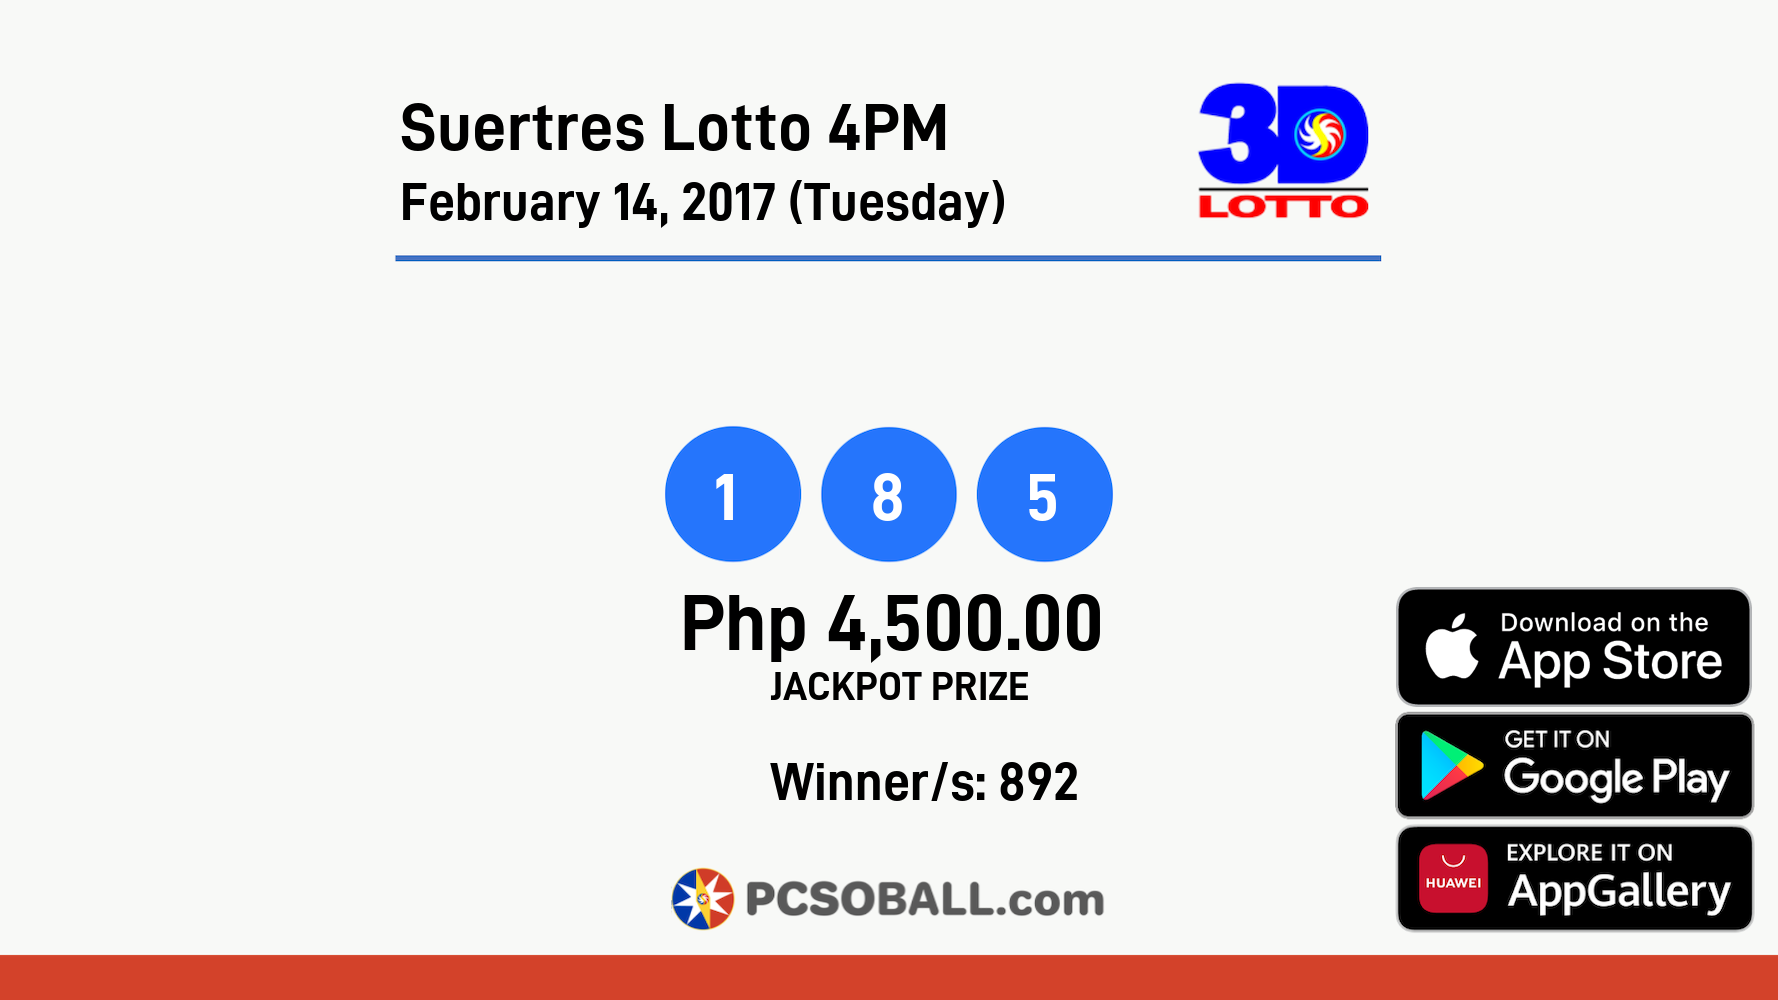 Suertres Lotto 4PM February 14, 2017 (Tuesday) Result